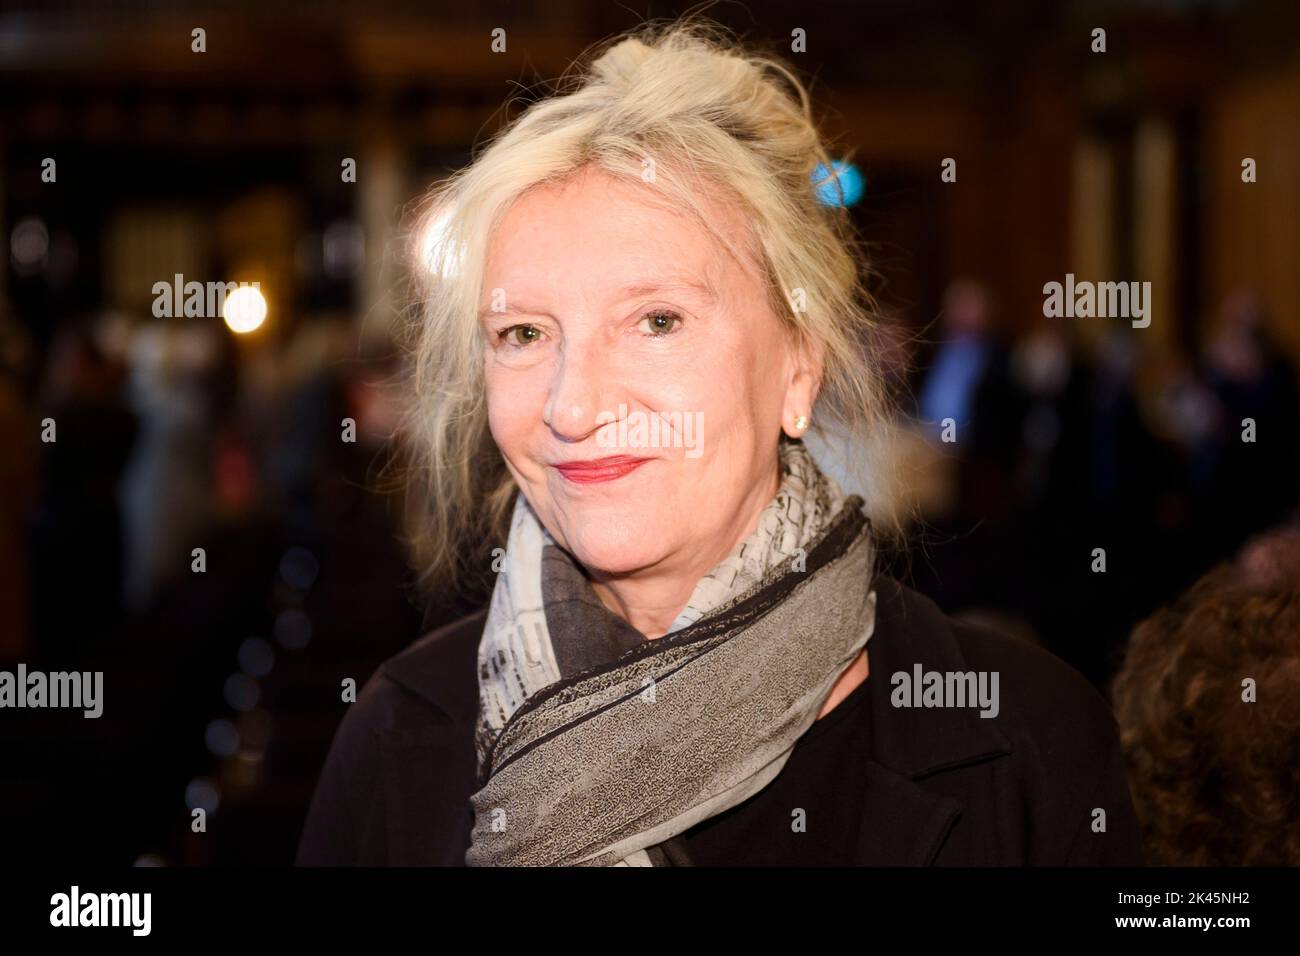 Hamburg, Germany. 30th Sep, 2022. Elizabeth Strout, writer and prize winner, attends the award ceremony for the Siegfried Lenz Prize of the foundation of the same name in the Great Ballroom of Hamburg City Hall. U.S. writer Strout has received the Siegfried Lenz Prize, which is endowed with 50,000 euros. Credit: Gregor Fischer/dpa/Alamy Live News Stock Photo